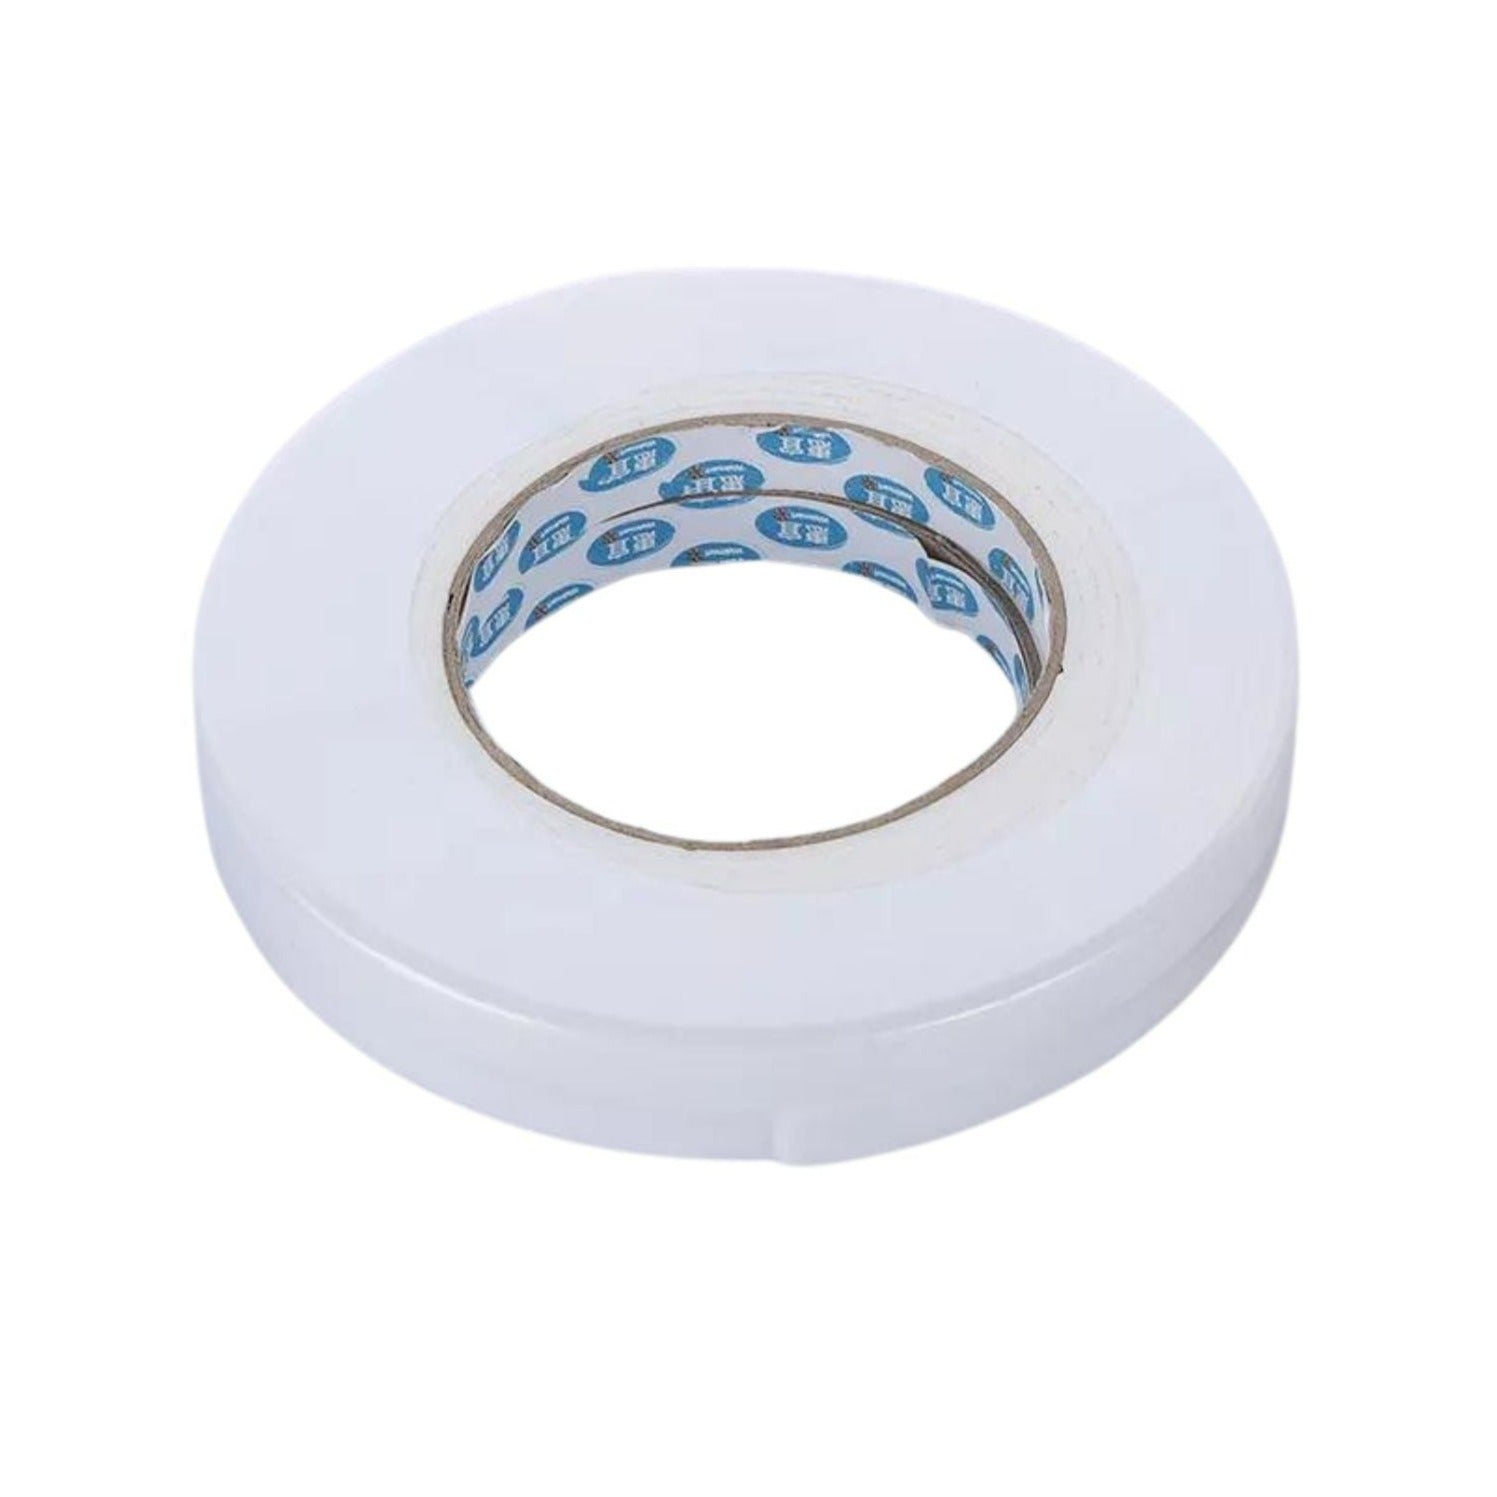 Double Sided Tape - 12mm x 1.5metre - South East Clearance Centre